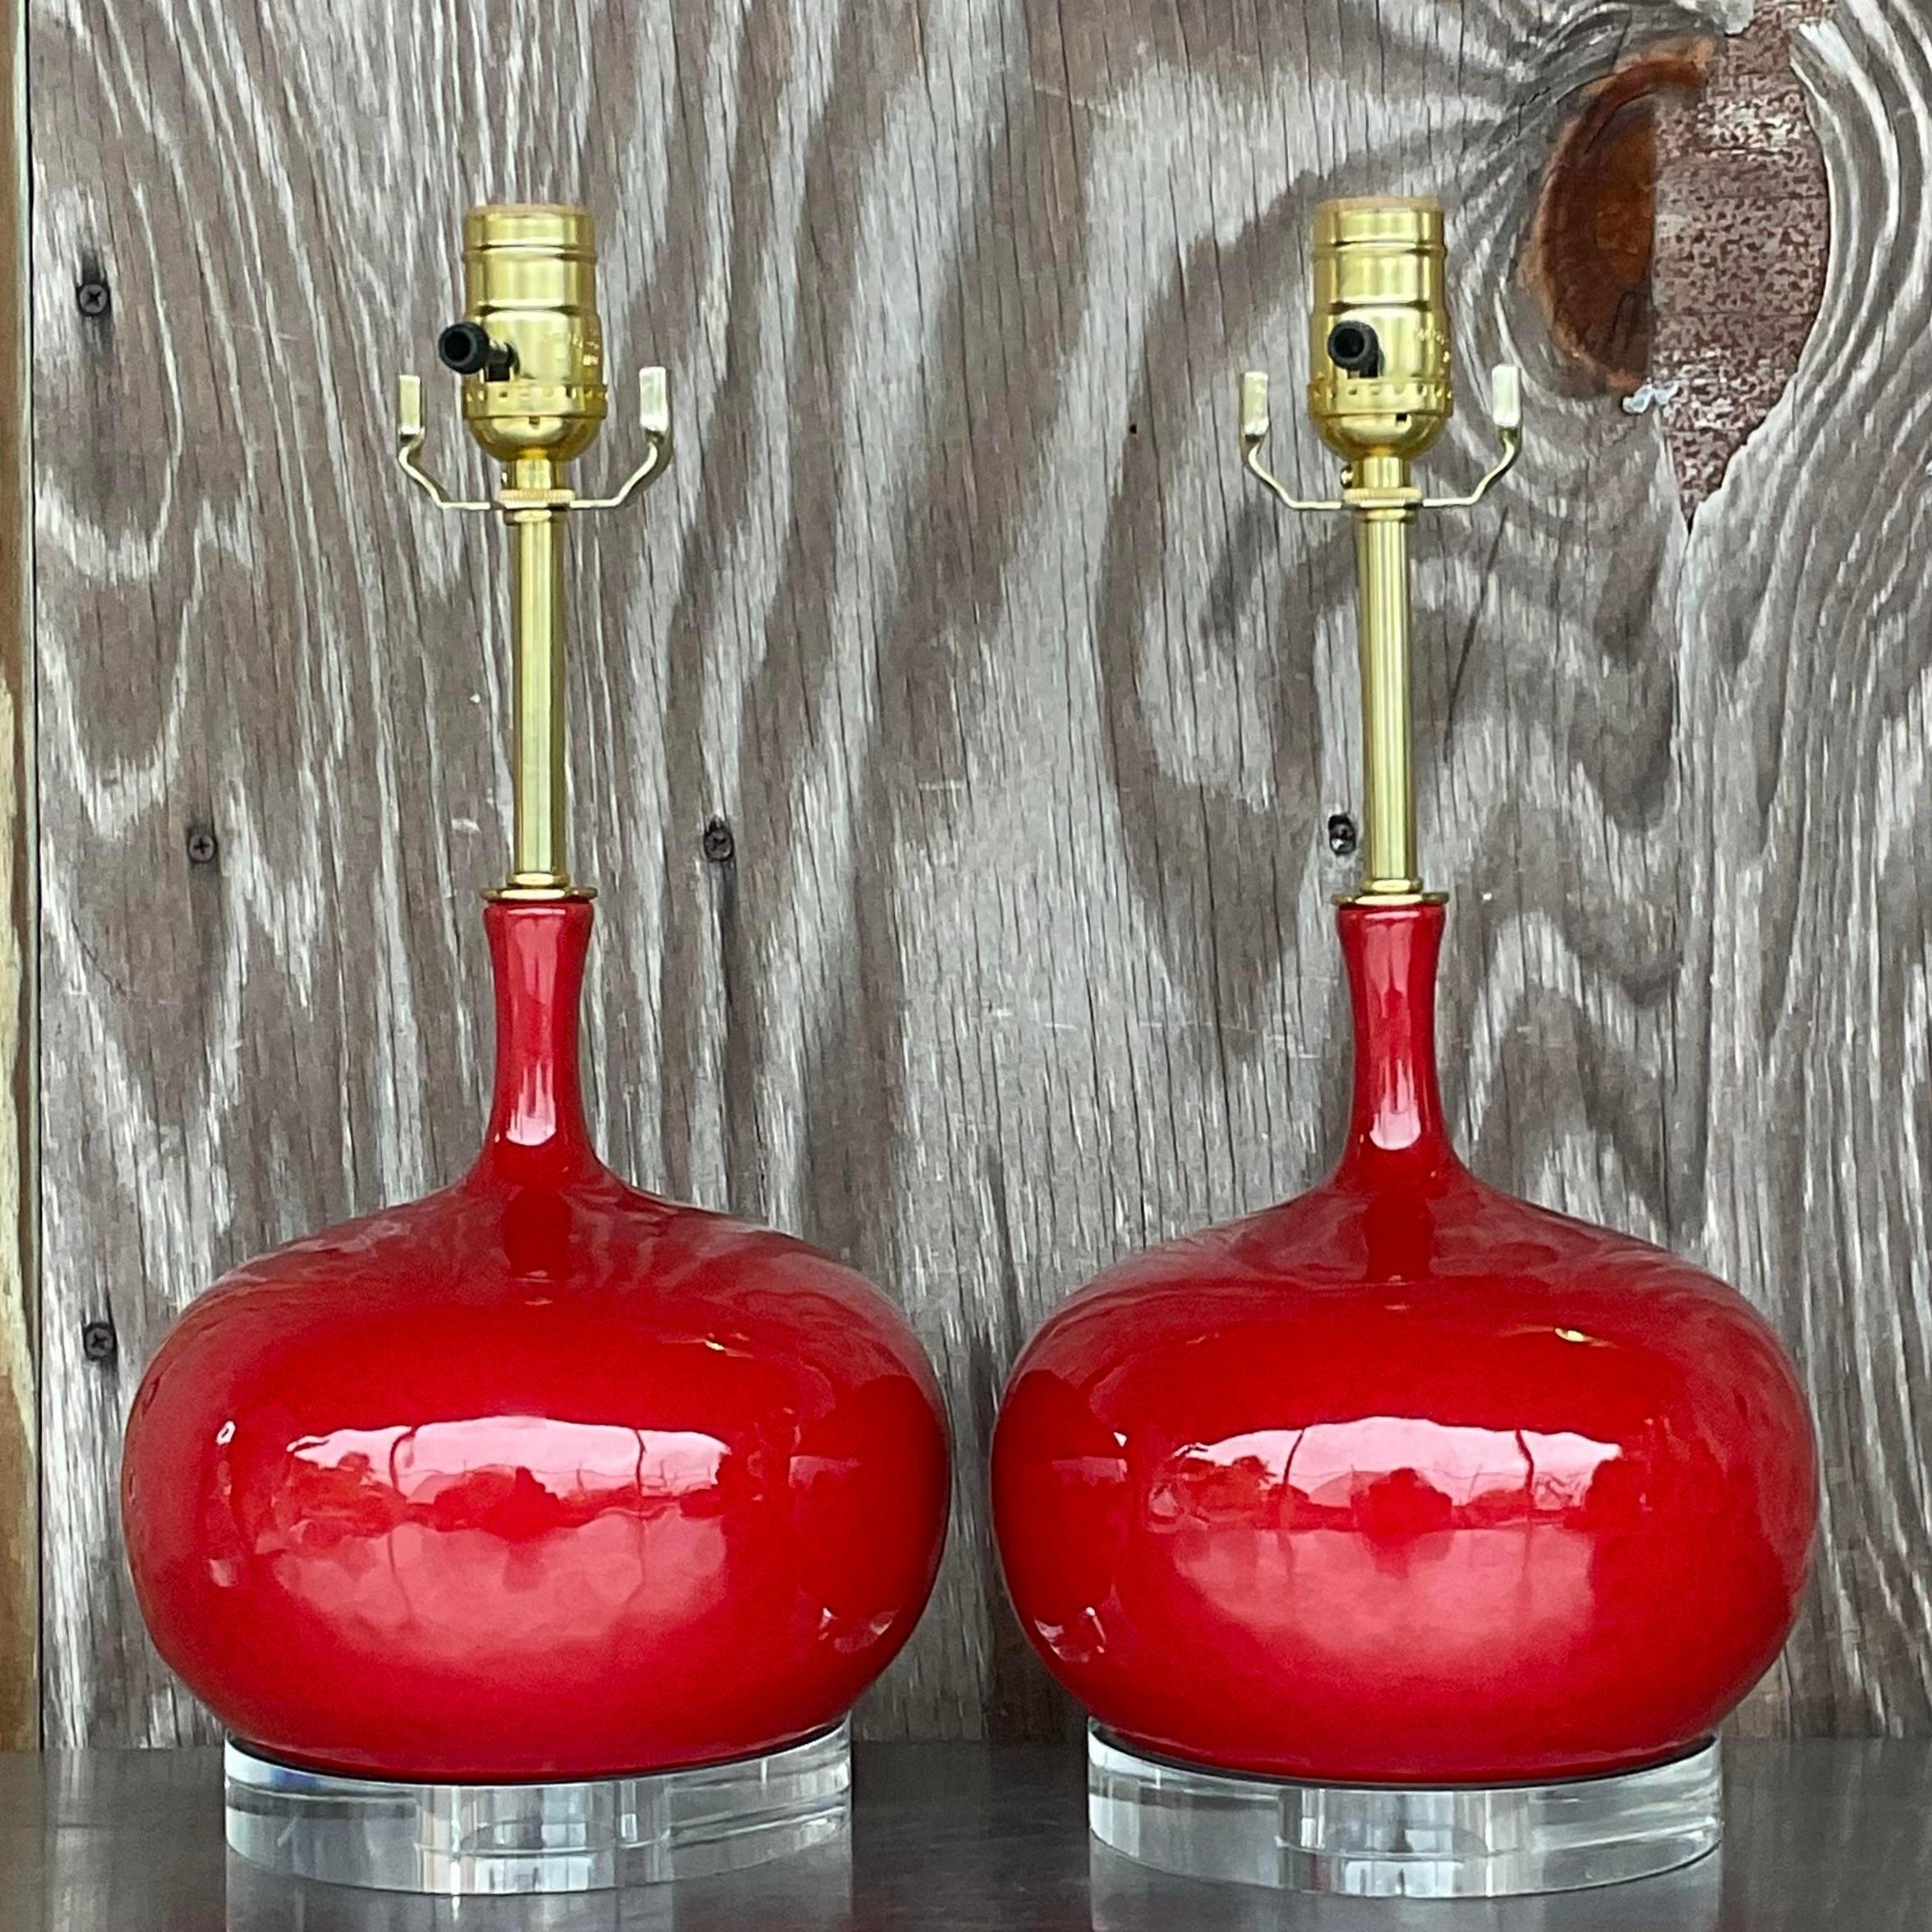 A fabulous pair of vintage Regency table lamps. A brilliant candy apple red in a glazed ceramic finish. Fully restored with all new wiring, hardware and lucite plinths. Acquired from a Palm Beach estate.